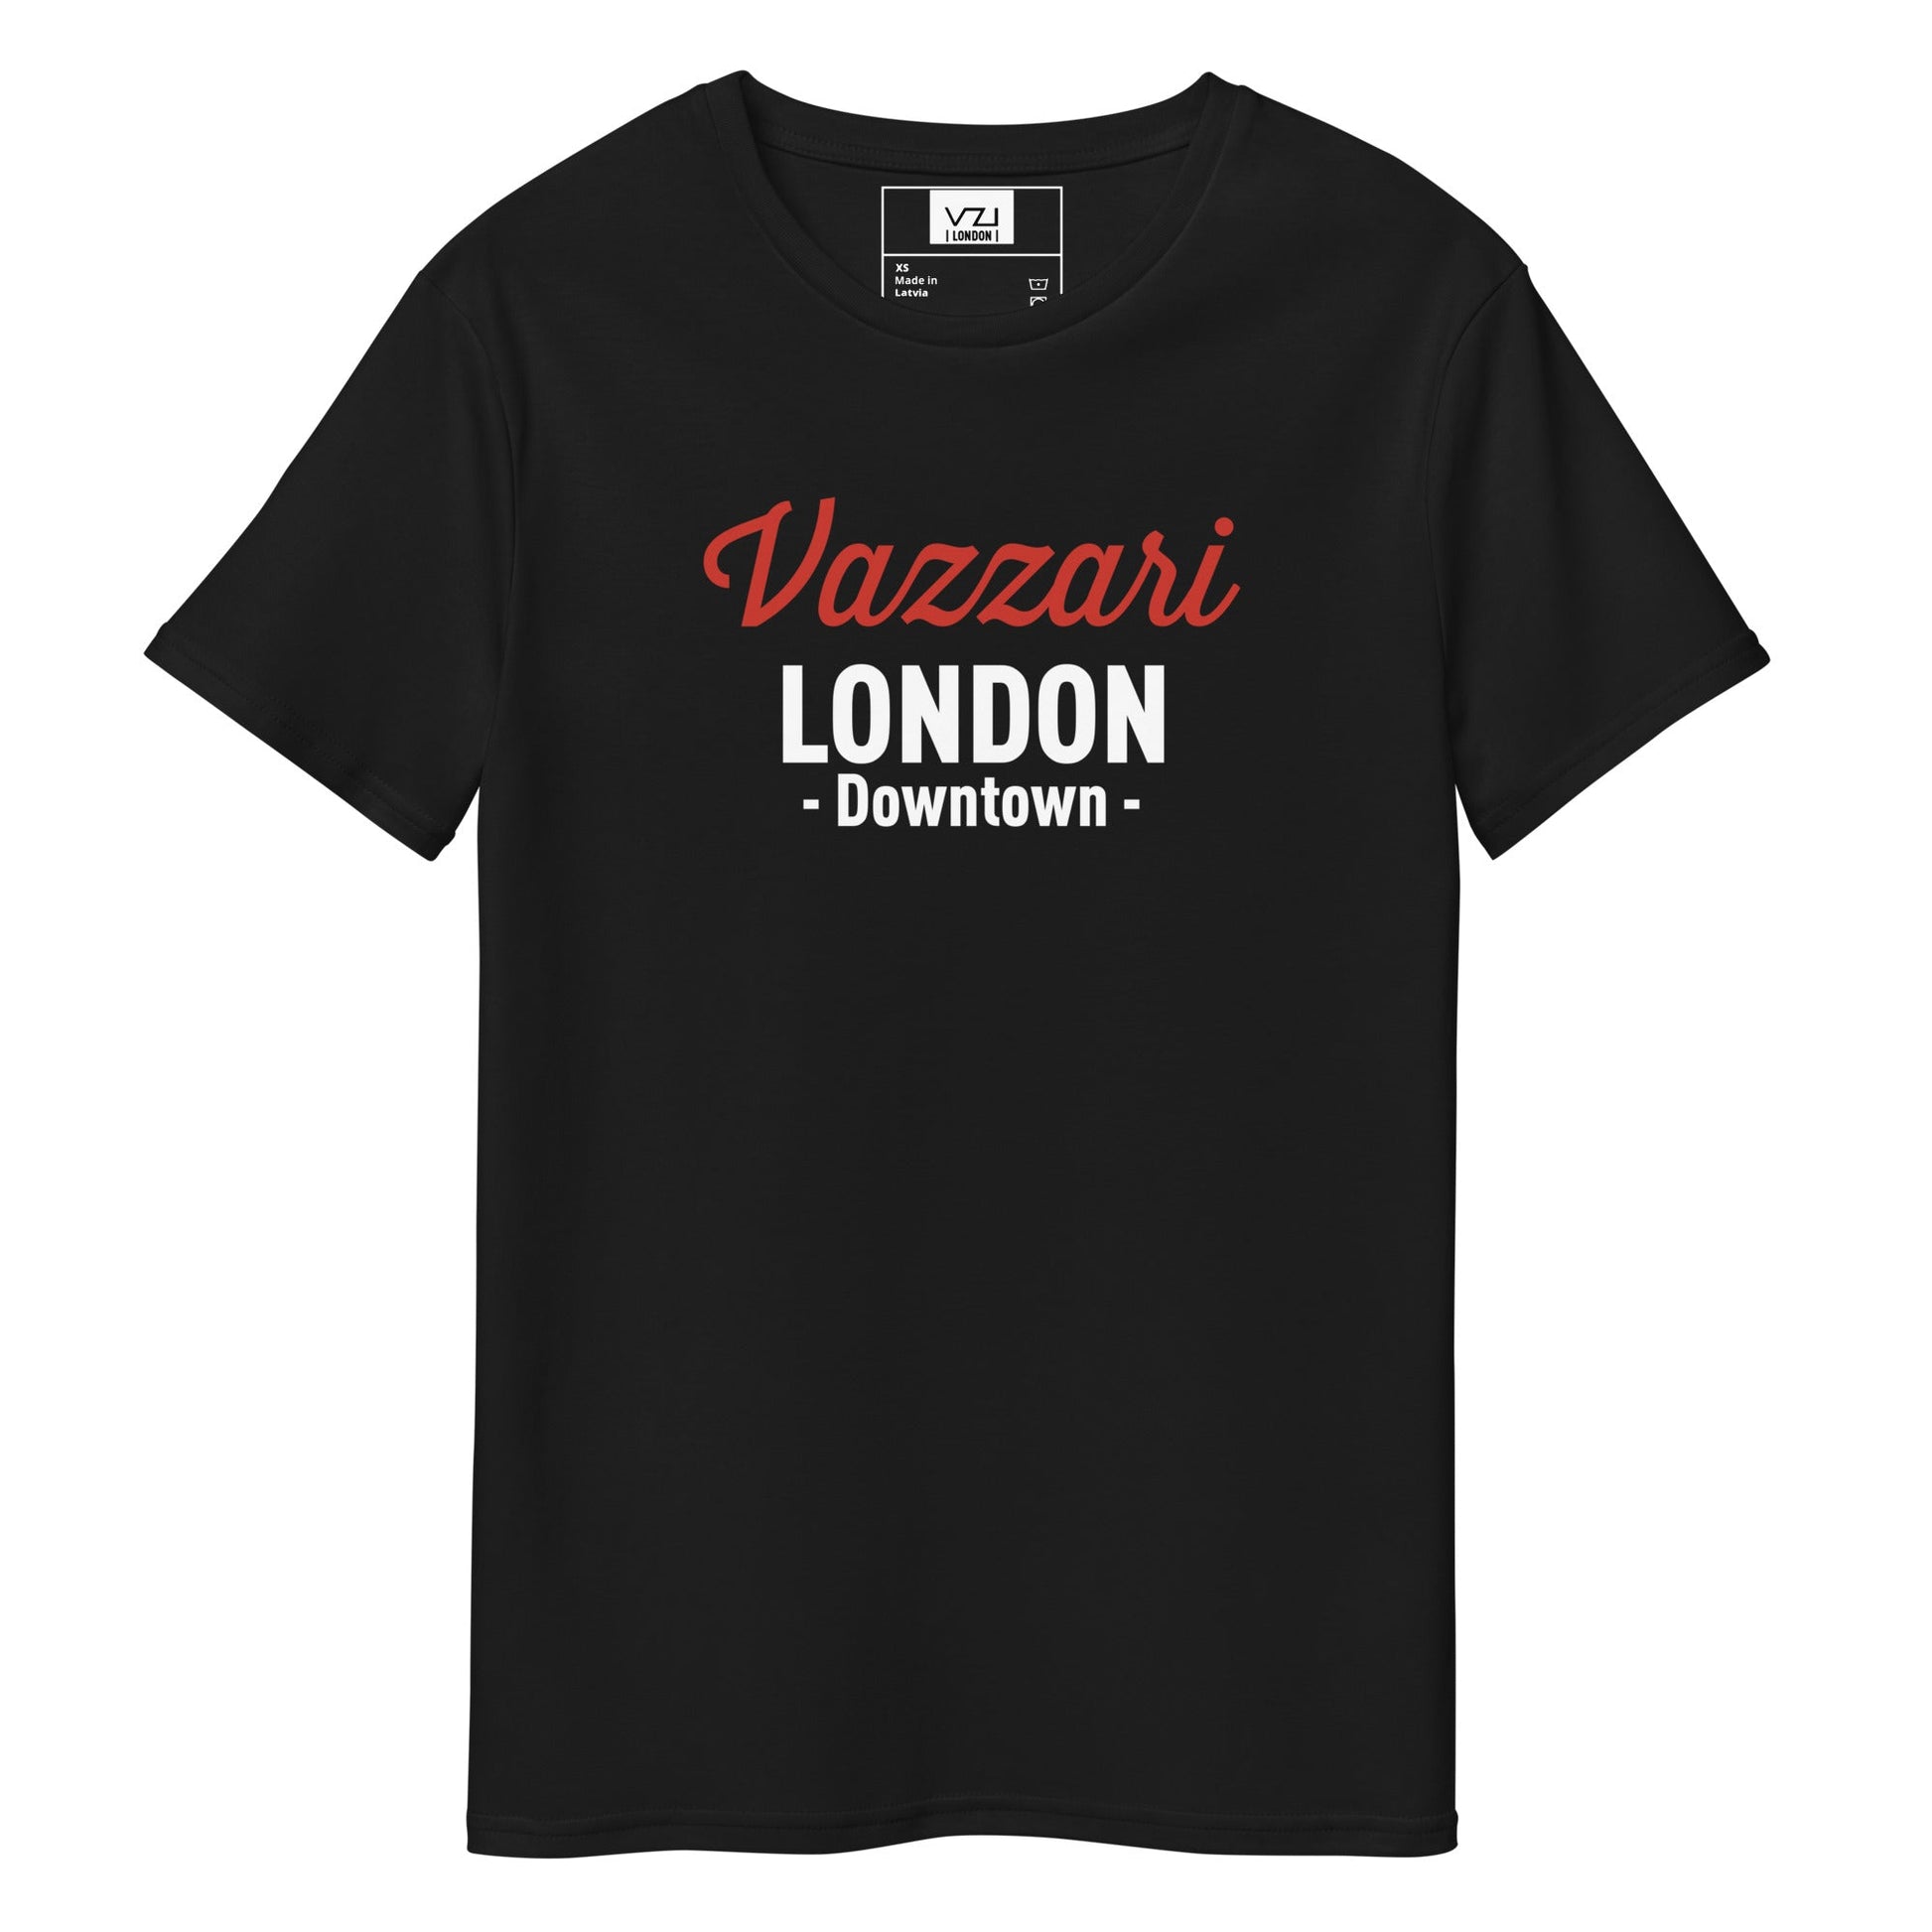 Downtown LONDON: T-Shirt For Men's - Premium Cotton, Inked Harley - Vazzari Couture